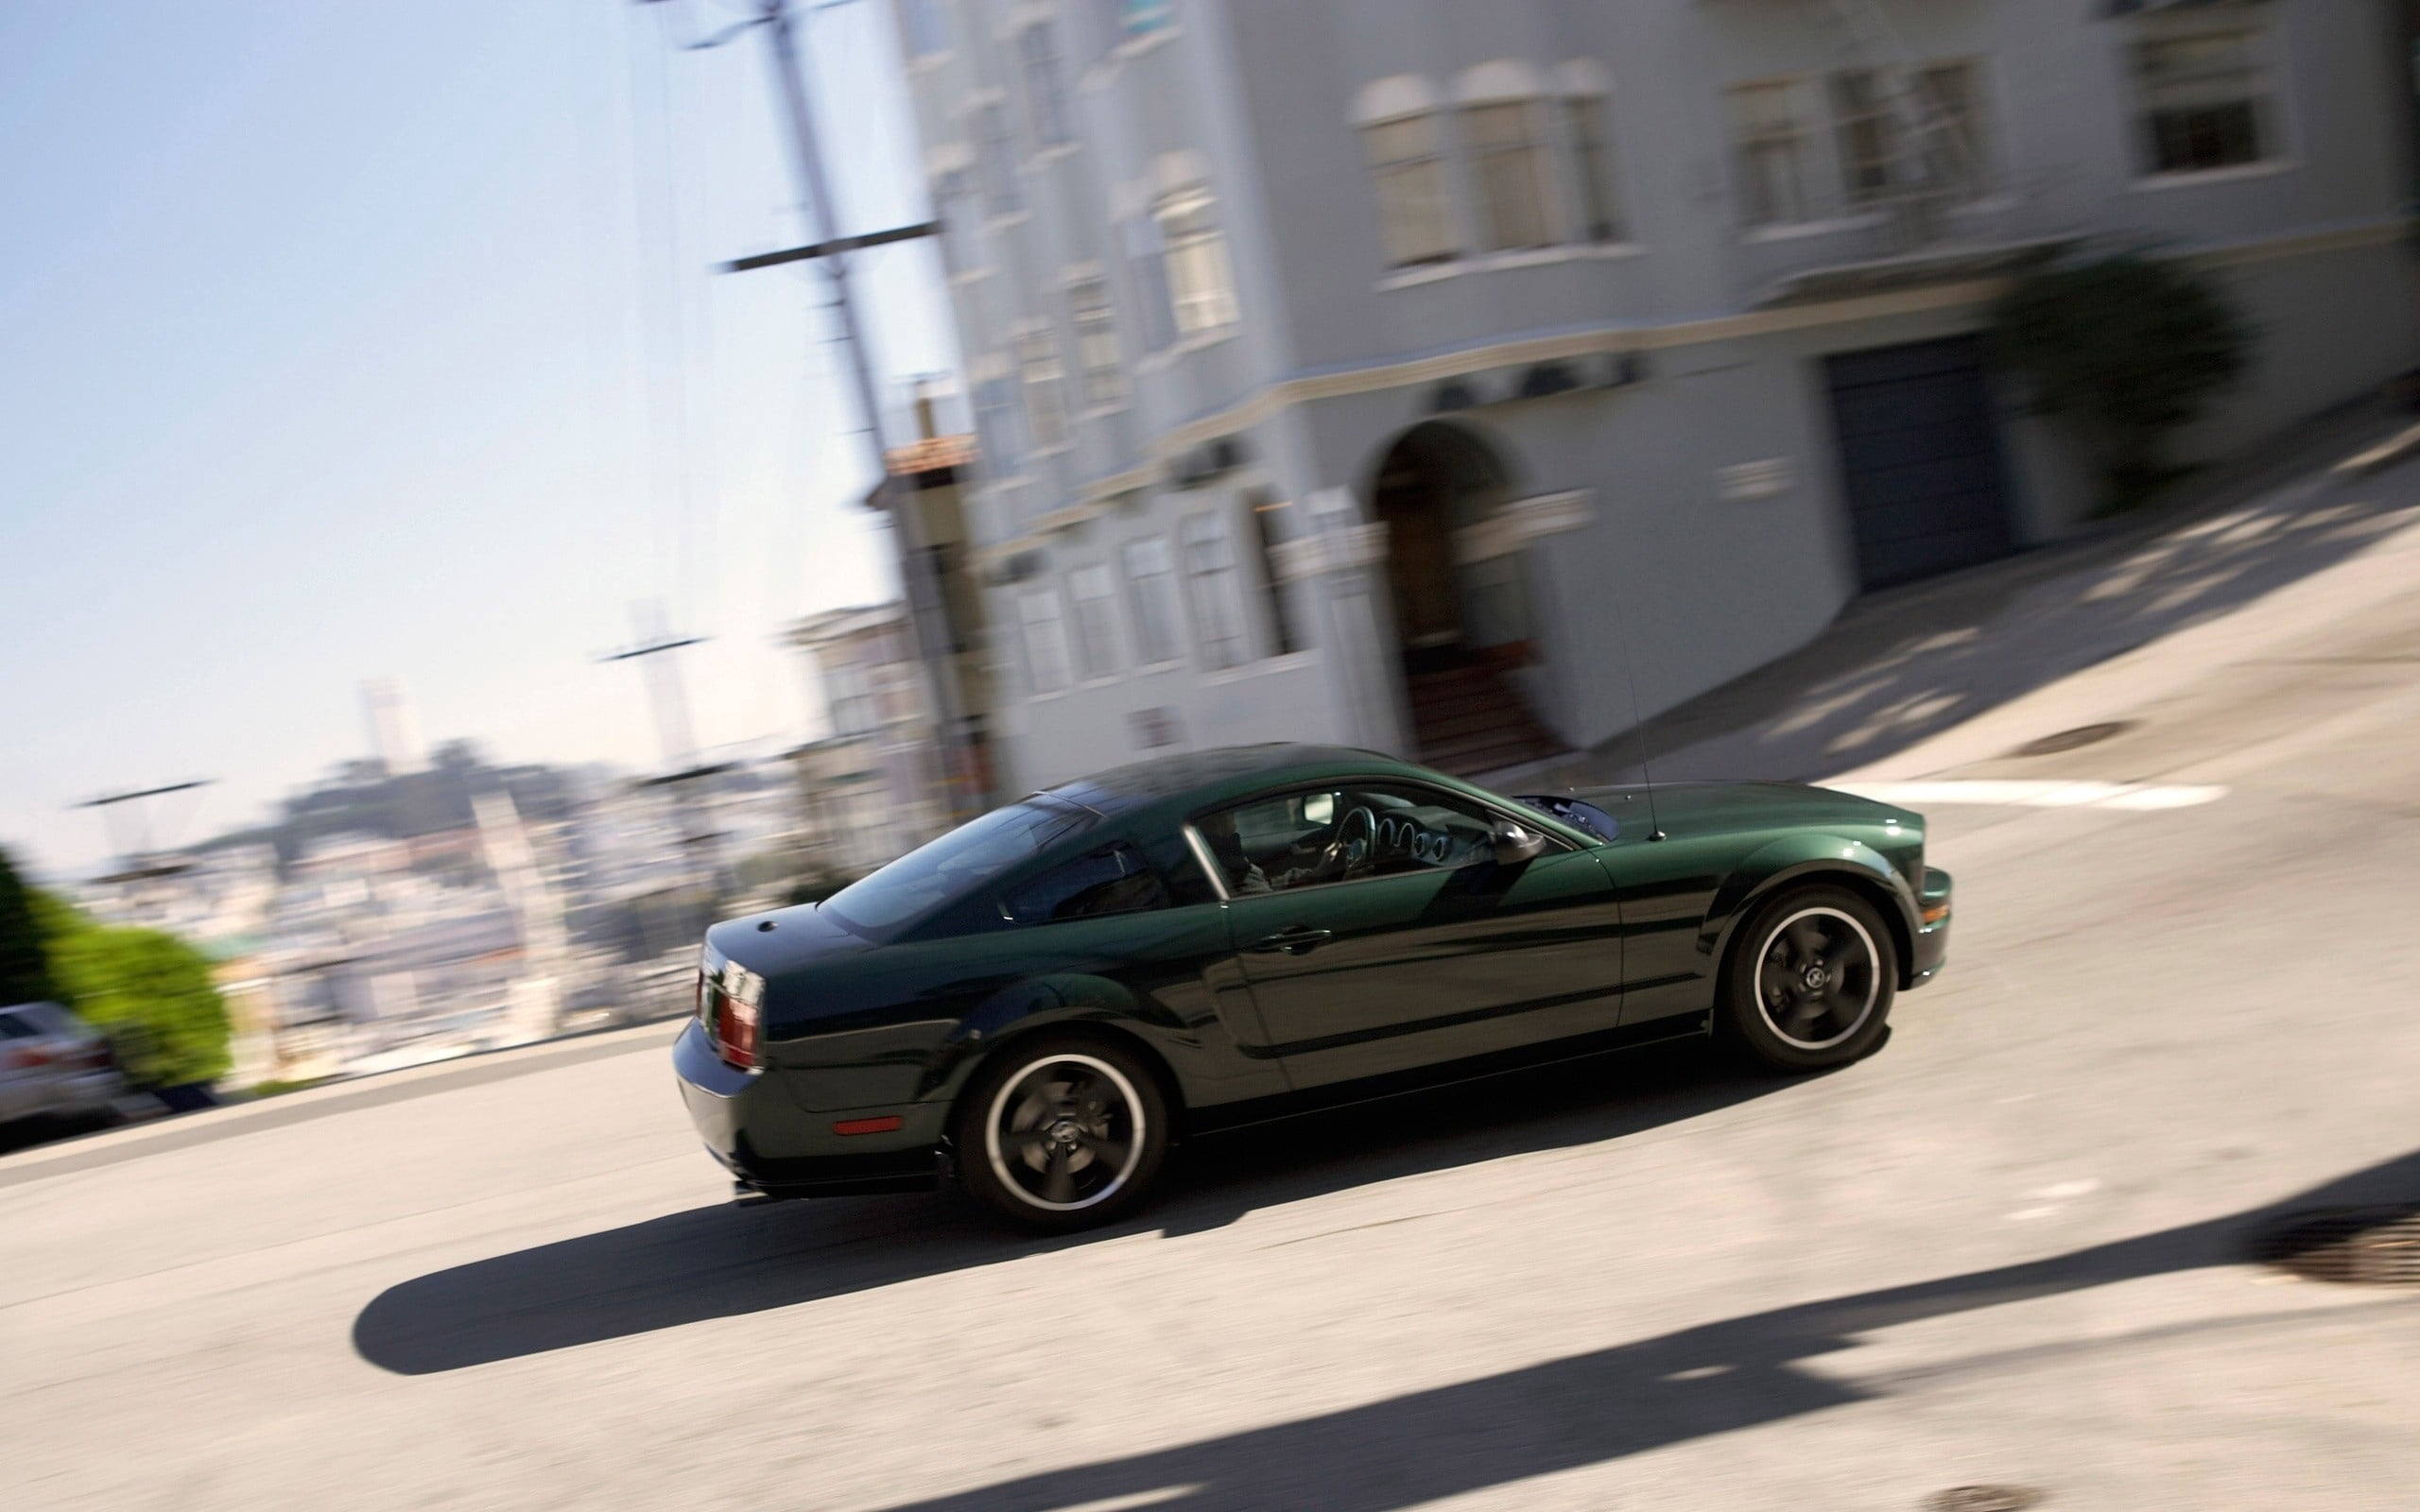 5th gen. green Ford Mustang coupe, car, street, transportation